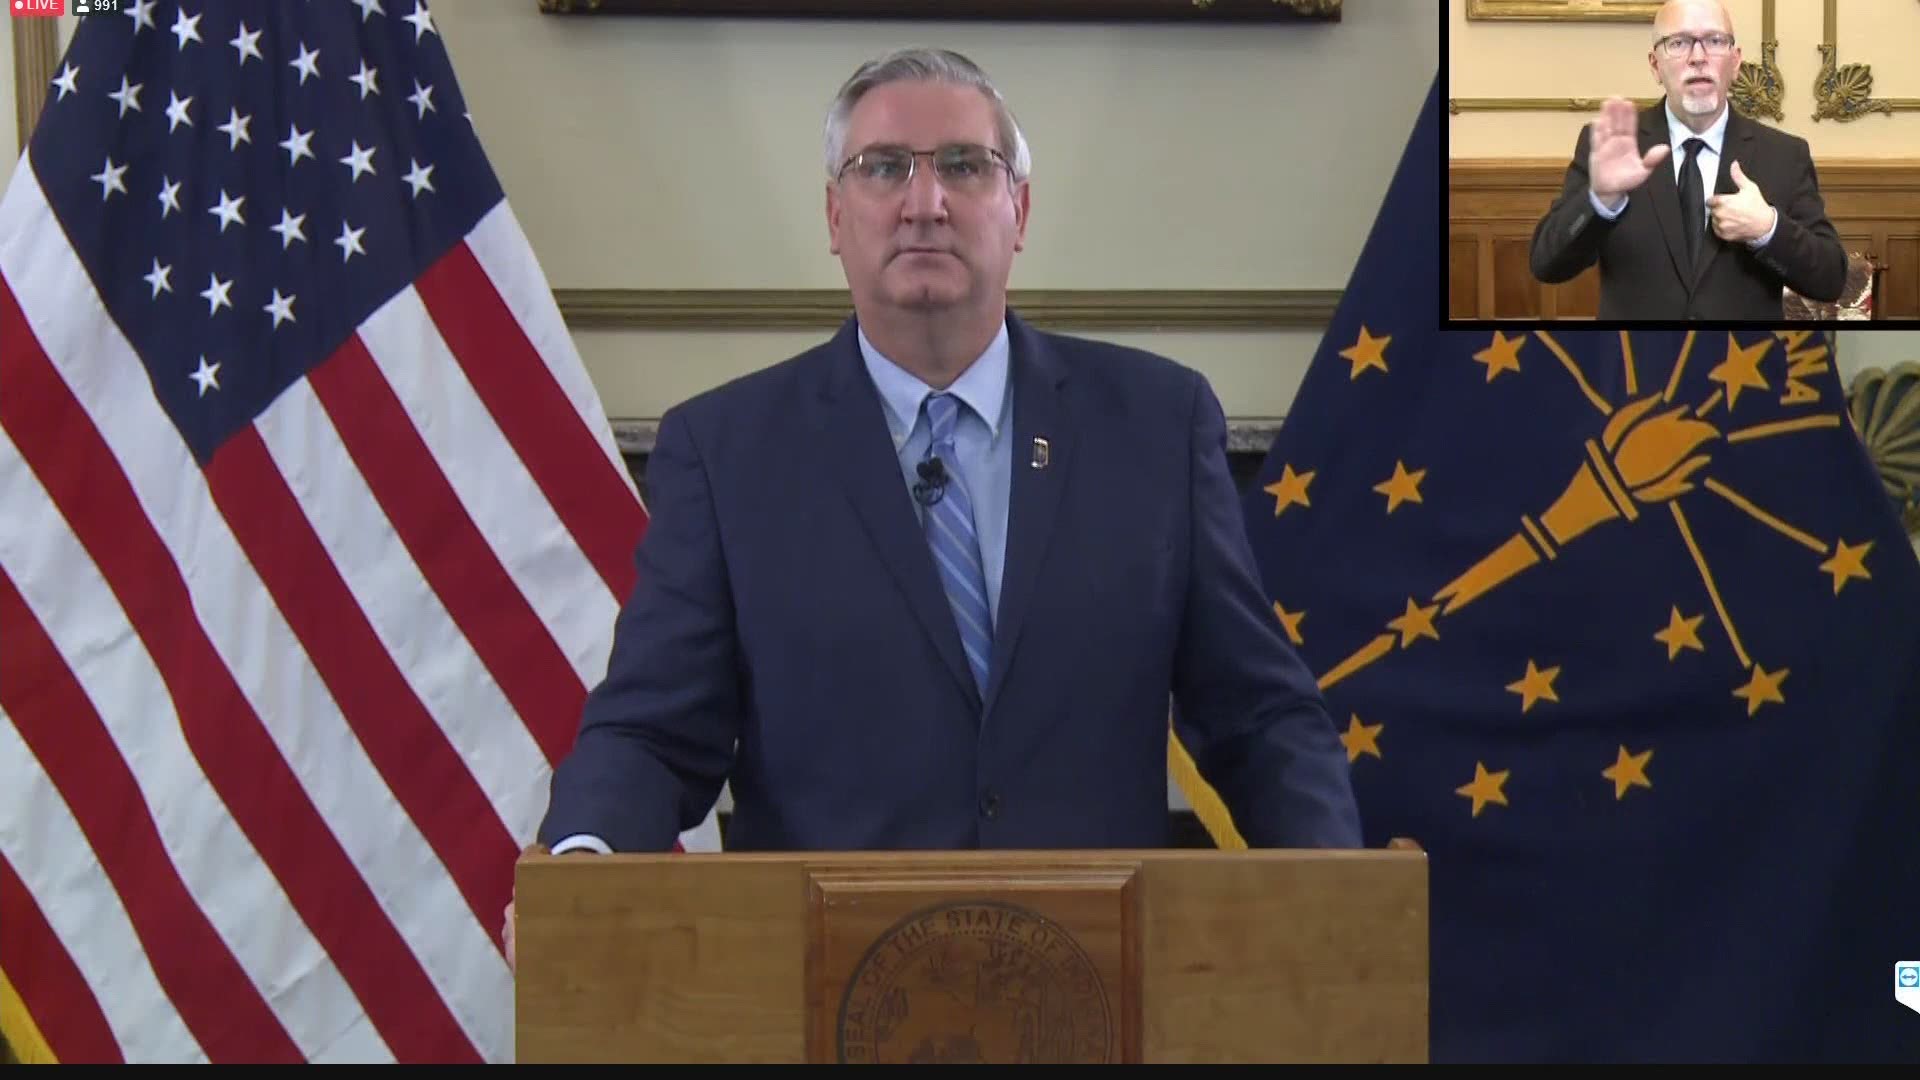 All Indiana State Troopers will get body cameras by next spring as part of a series of new plans announced by Governor Holcomb.